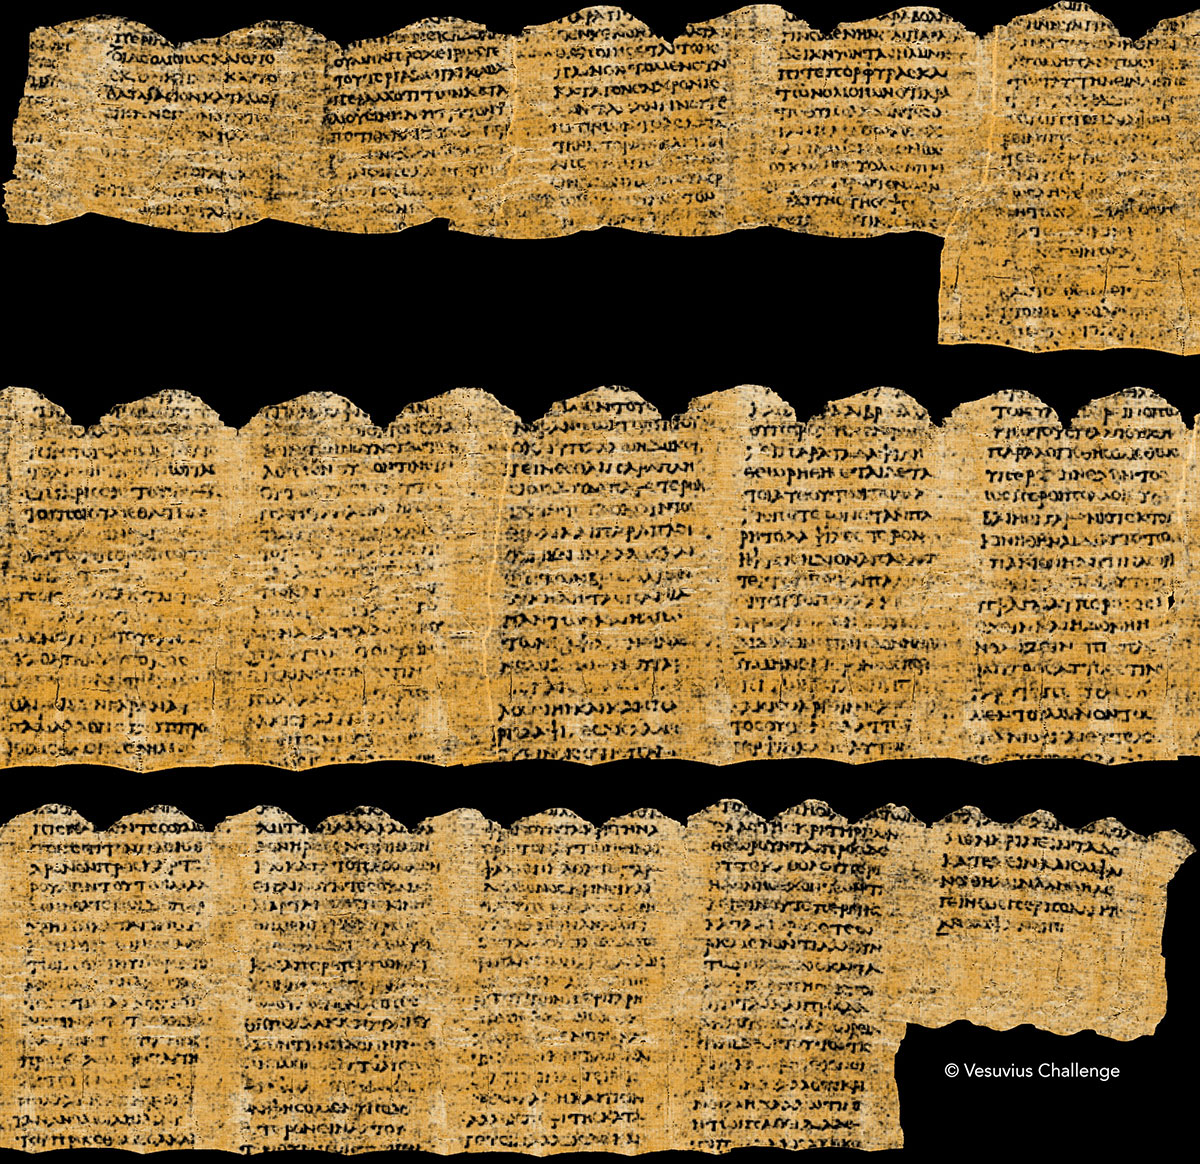 Text from PHerc.Paris. 4 (Institut de France), unseen for 2,000 years. Roughly 95% of the scroll remains to be read. © Vesuvius Challenge.